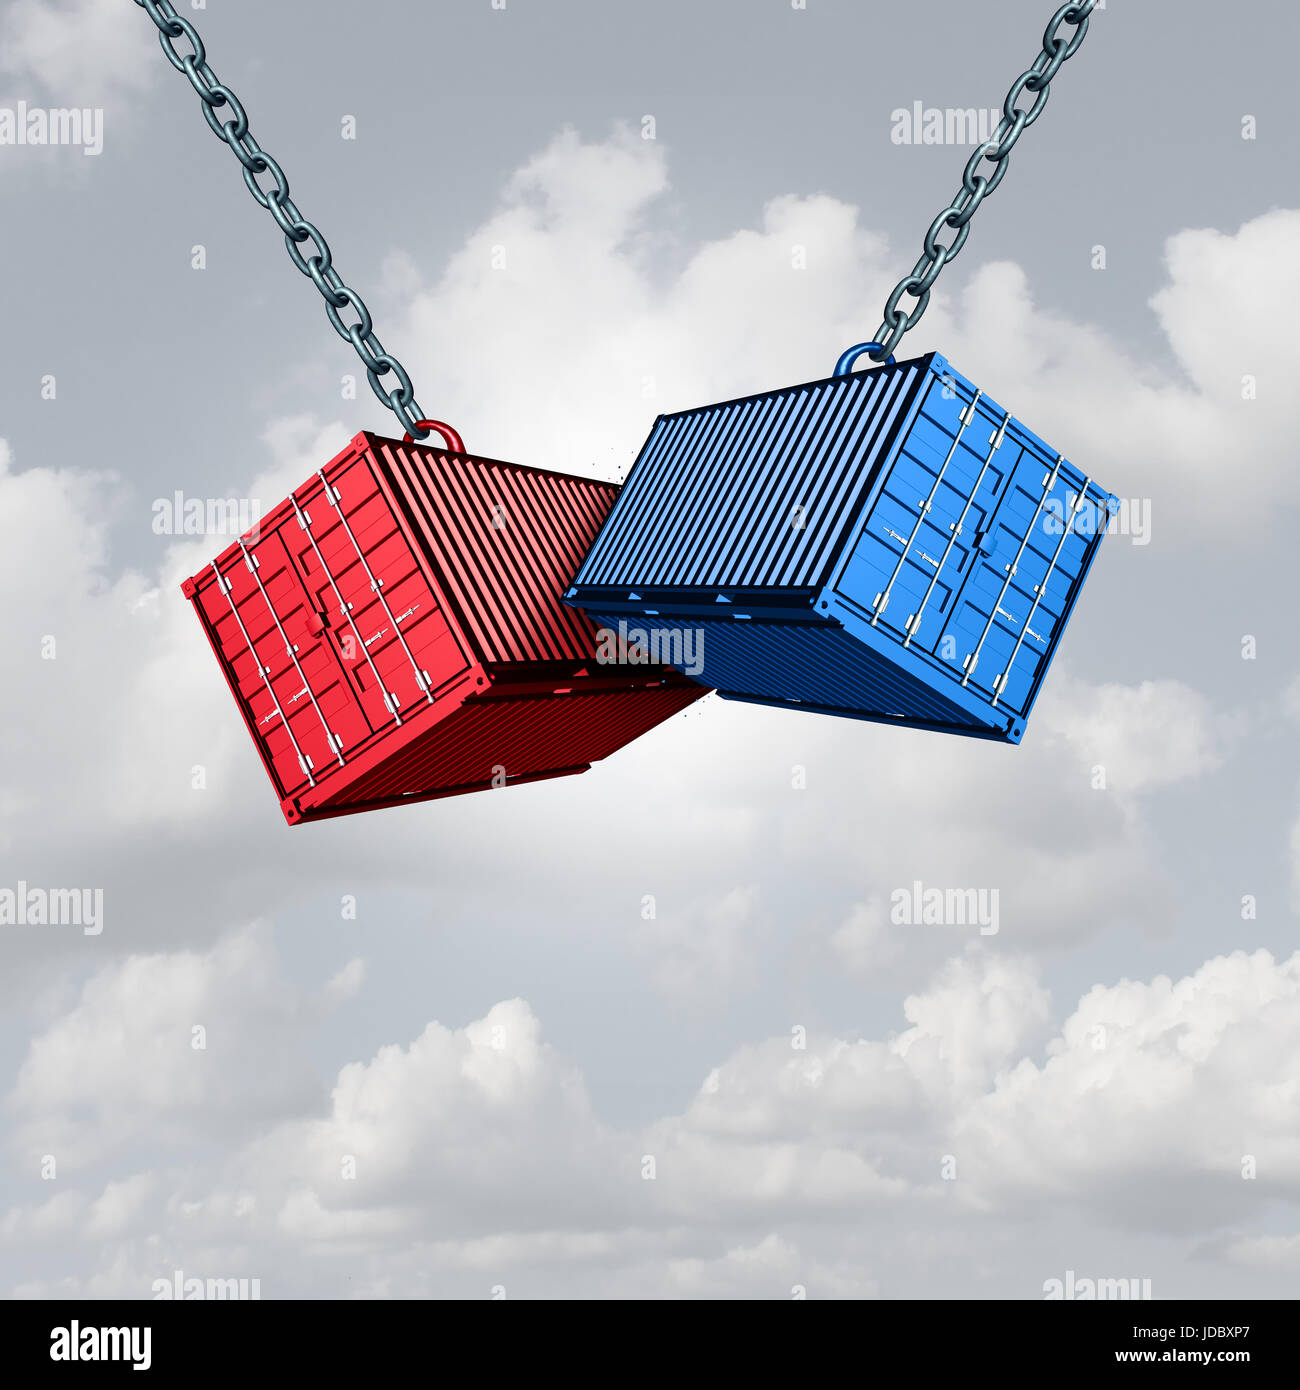 Trade war concept and economic conflict metaphor as two cargo freight shipping containers crashing into each other as a financial commerce. Stock Photo